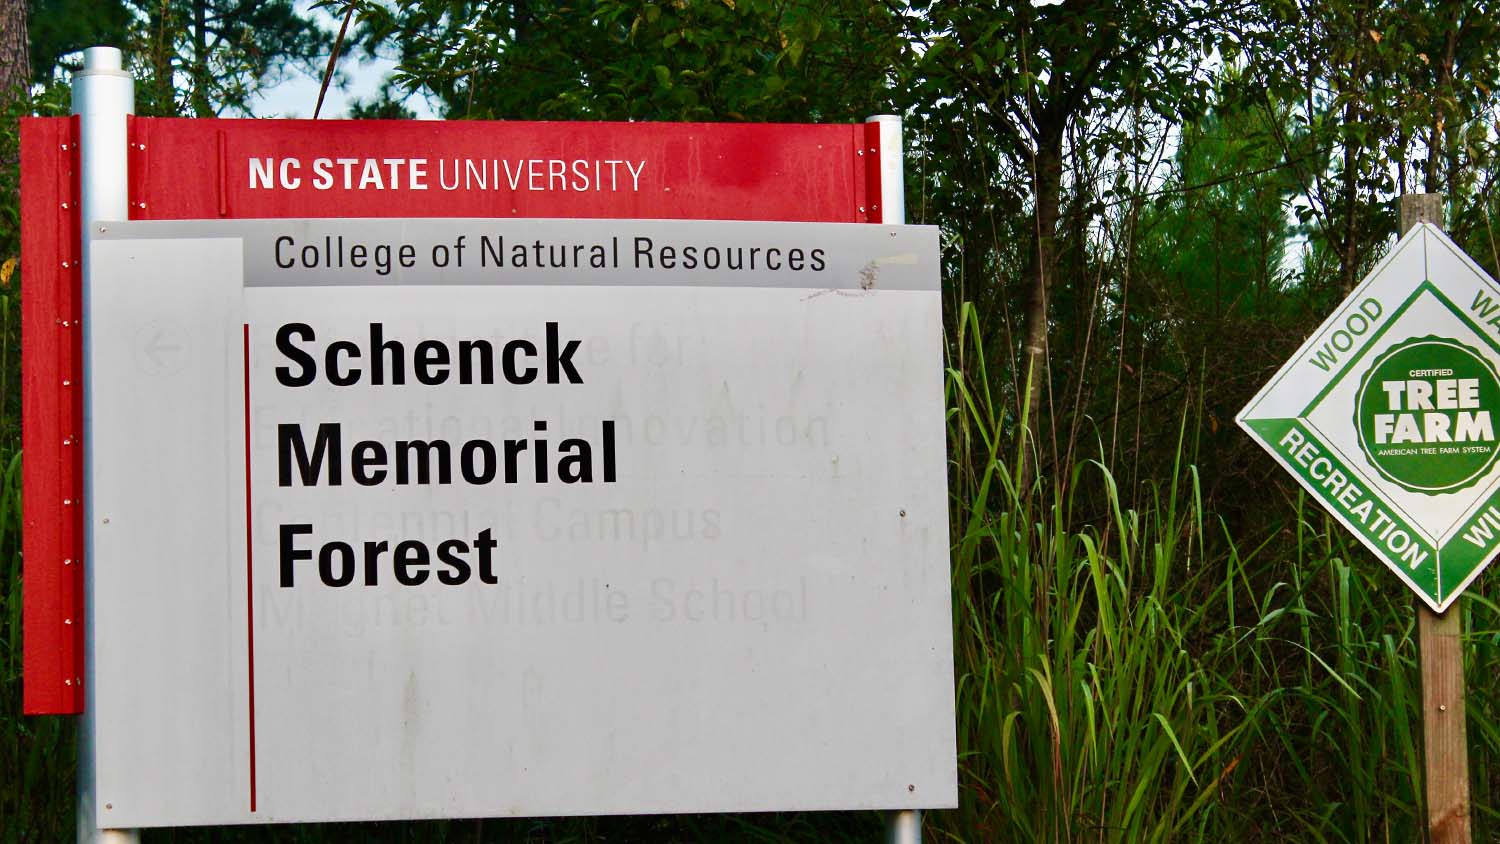 Schenck Memorial Forest Sign - History of the Schenck Forest - College of Natural Resources at NC State University